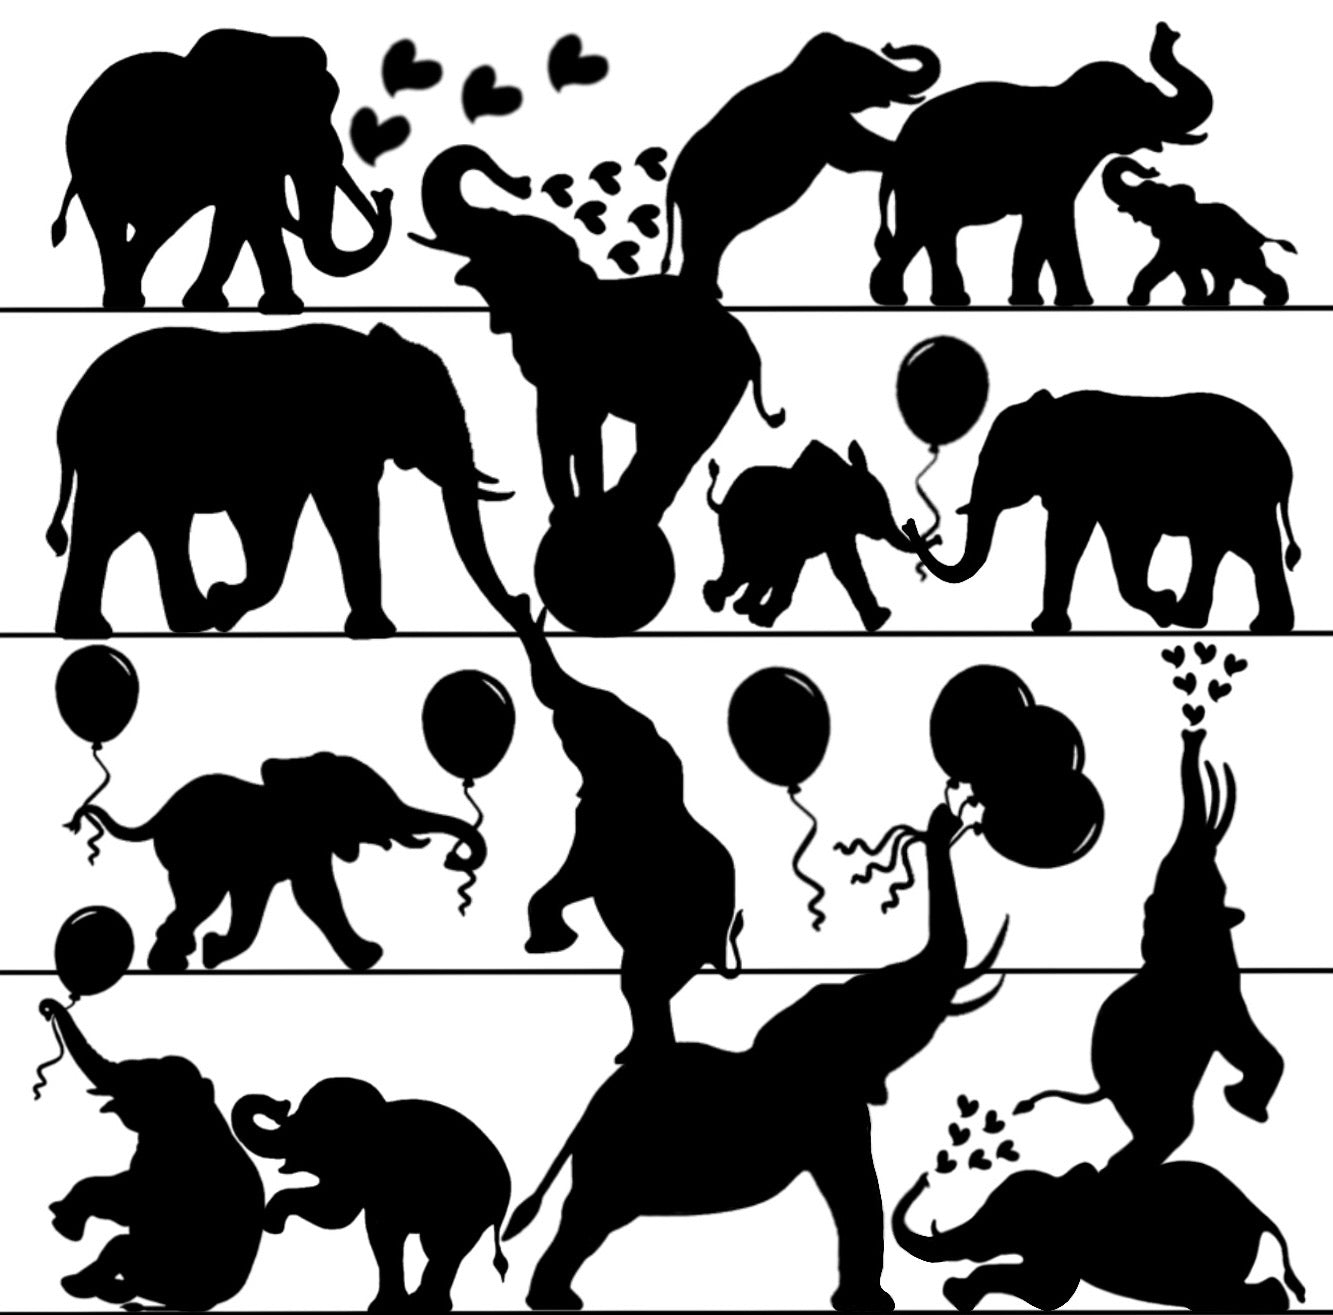 Playful Elephants Silhouette Collection Art Square Personalised Coaster Gift Idea